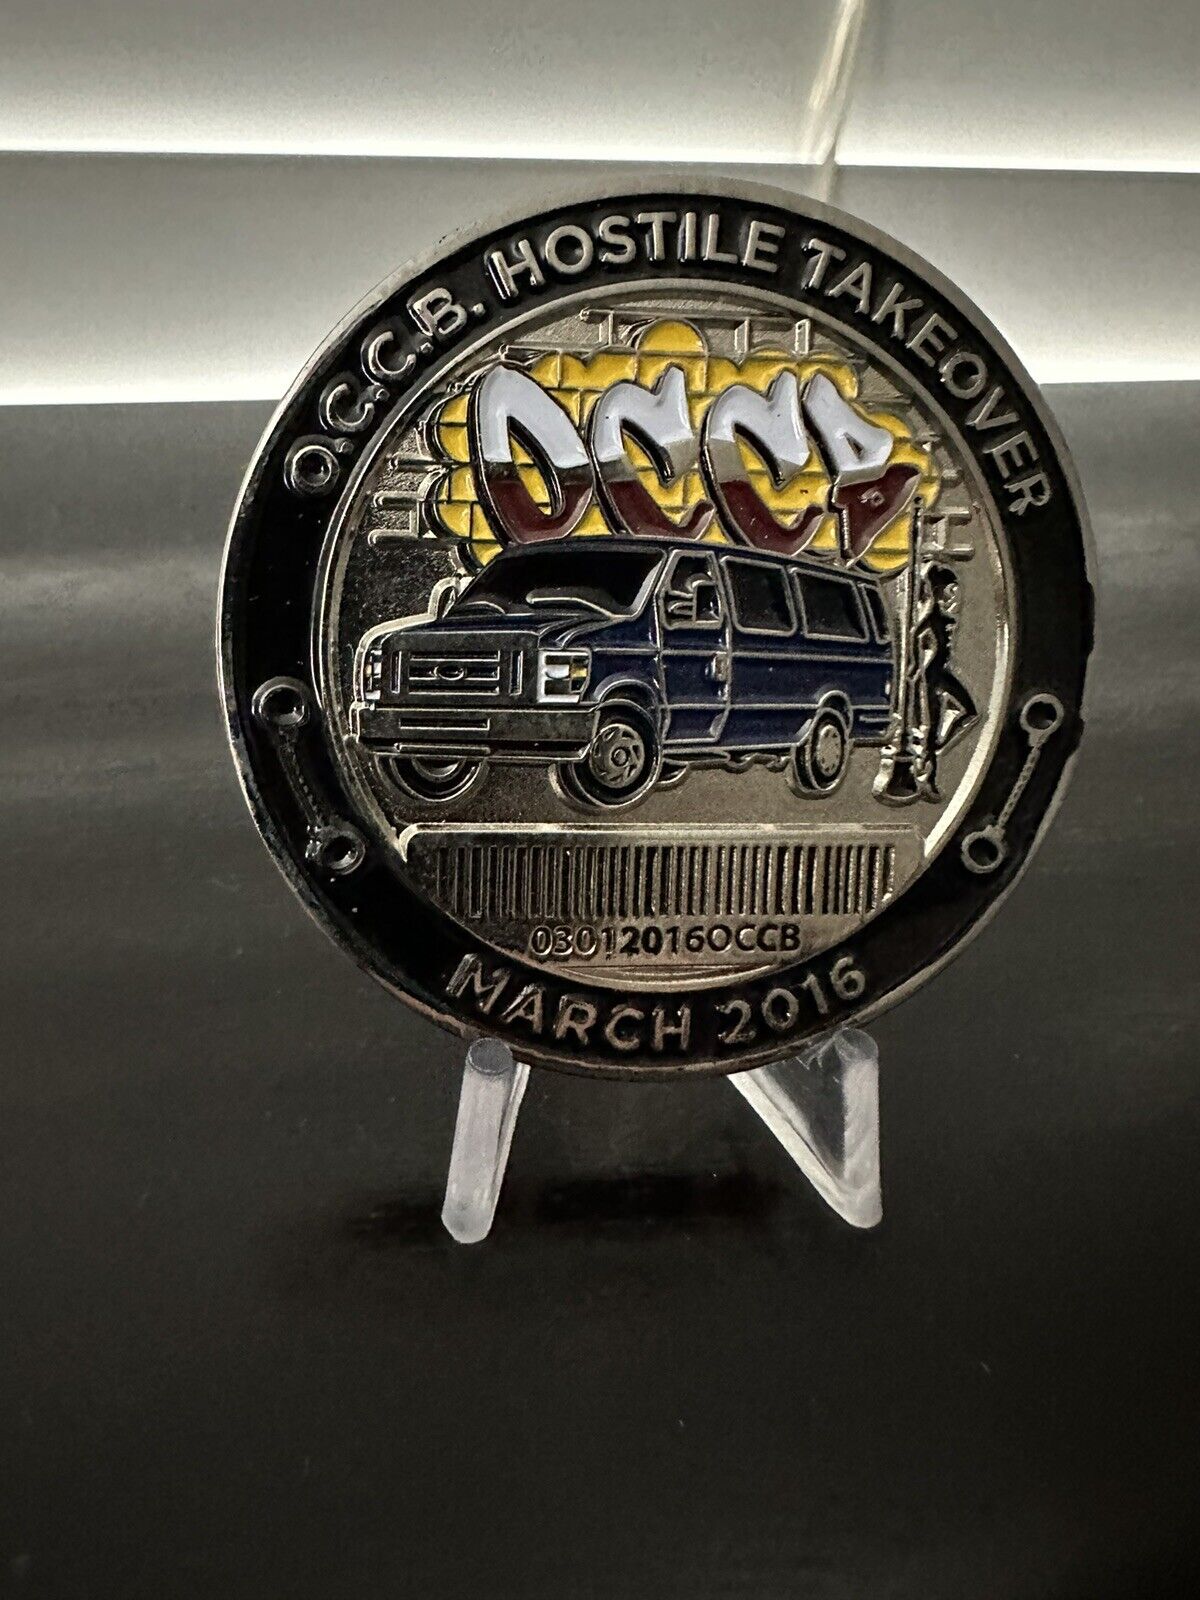 NYPD OCCB Hostile Takeover March 2016 Challenge Coin Rare